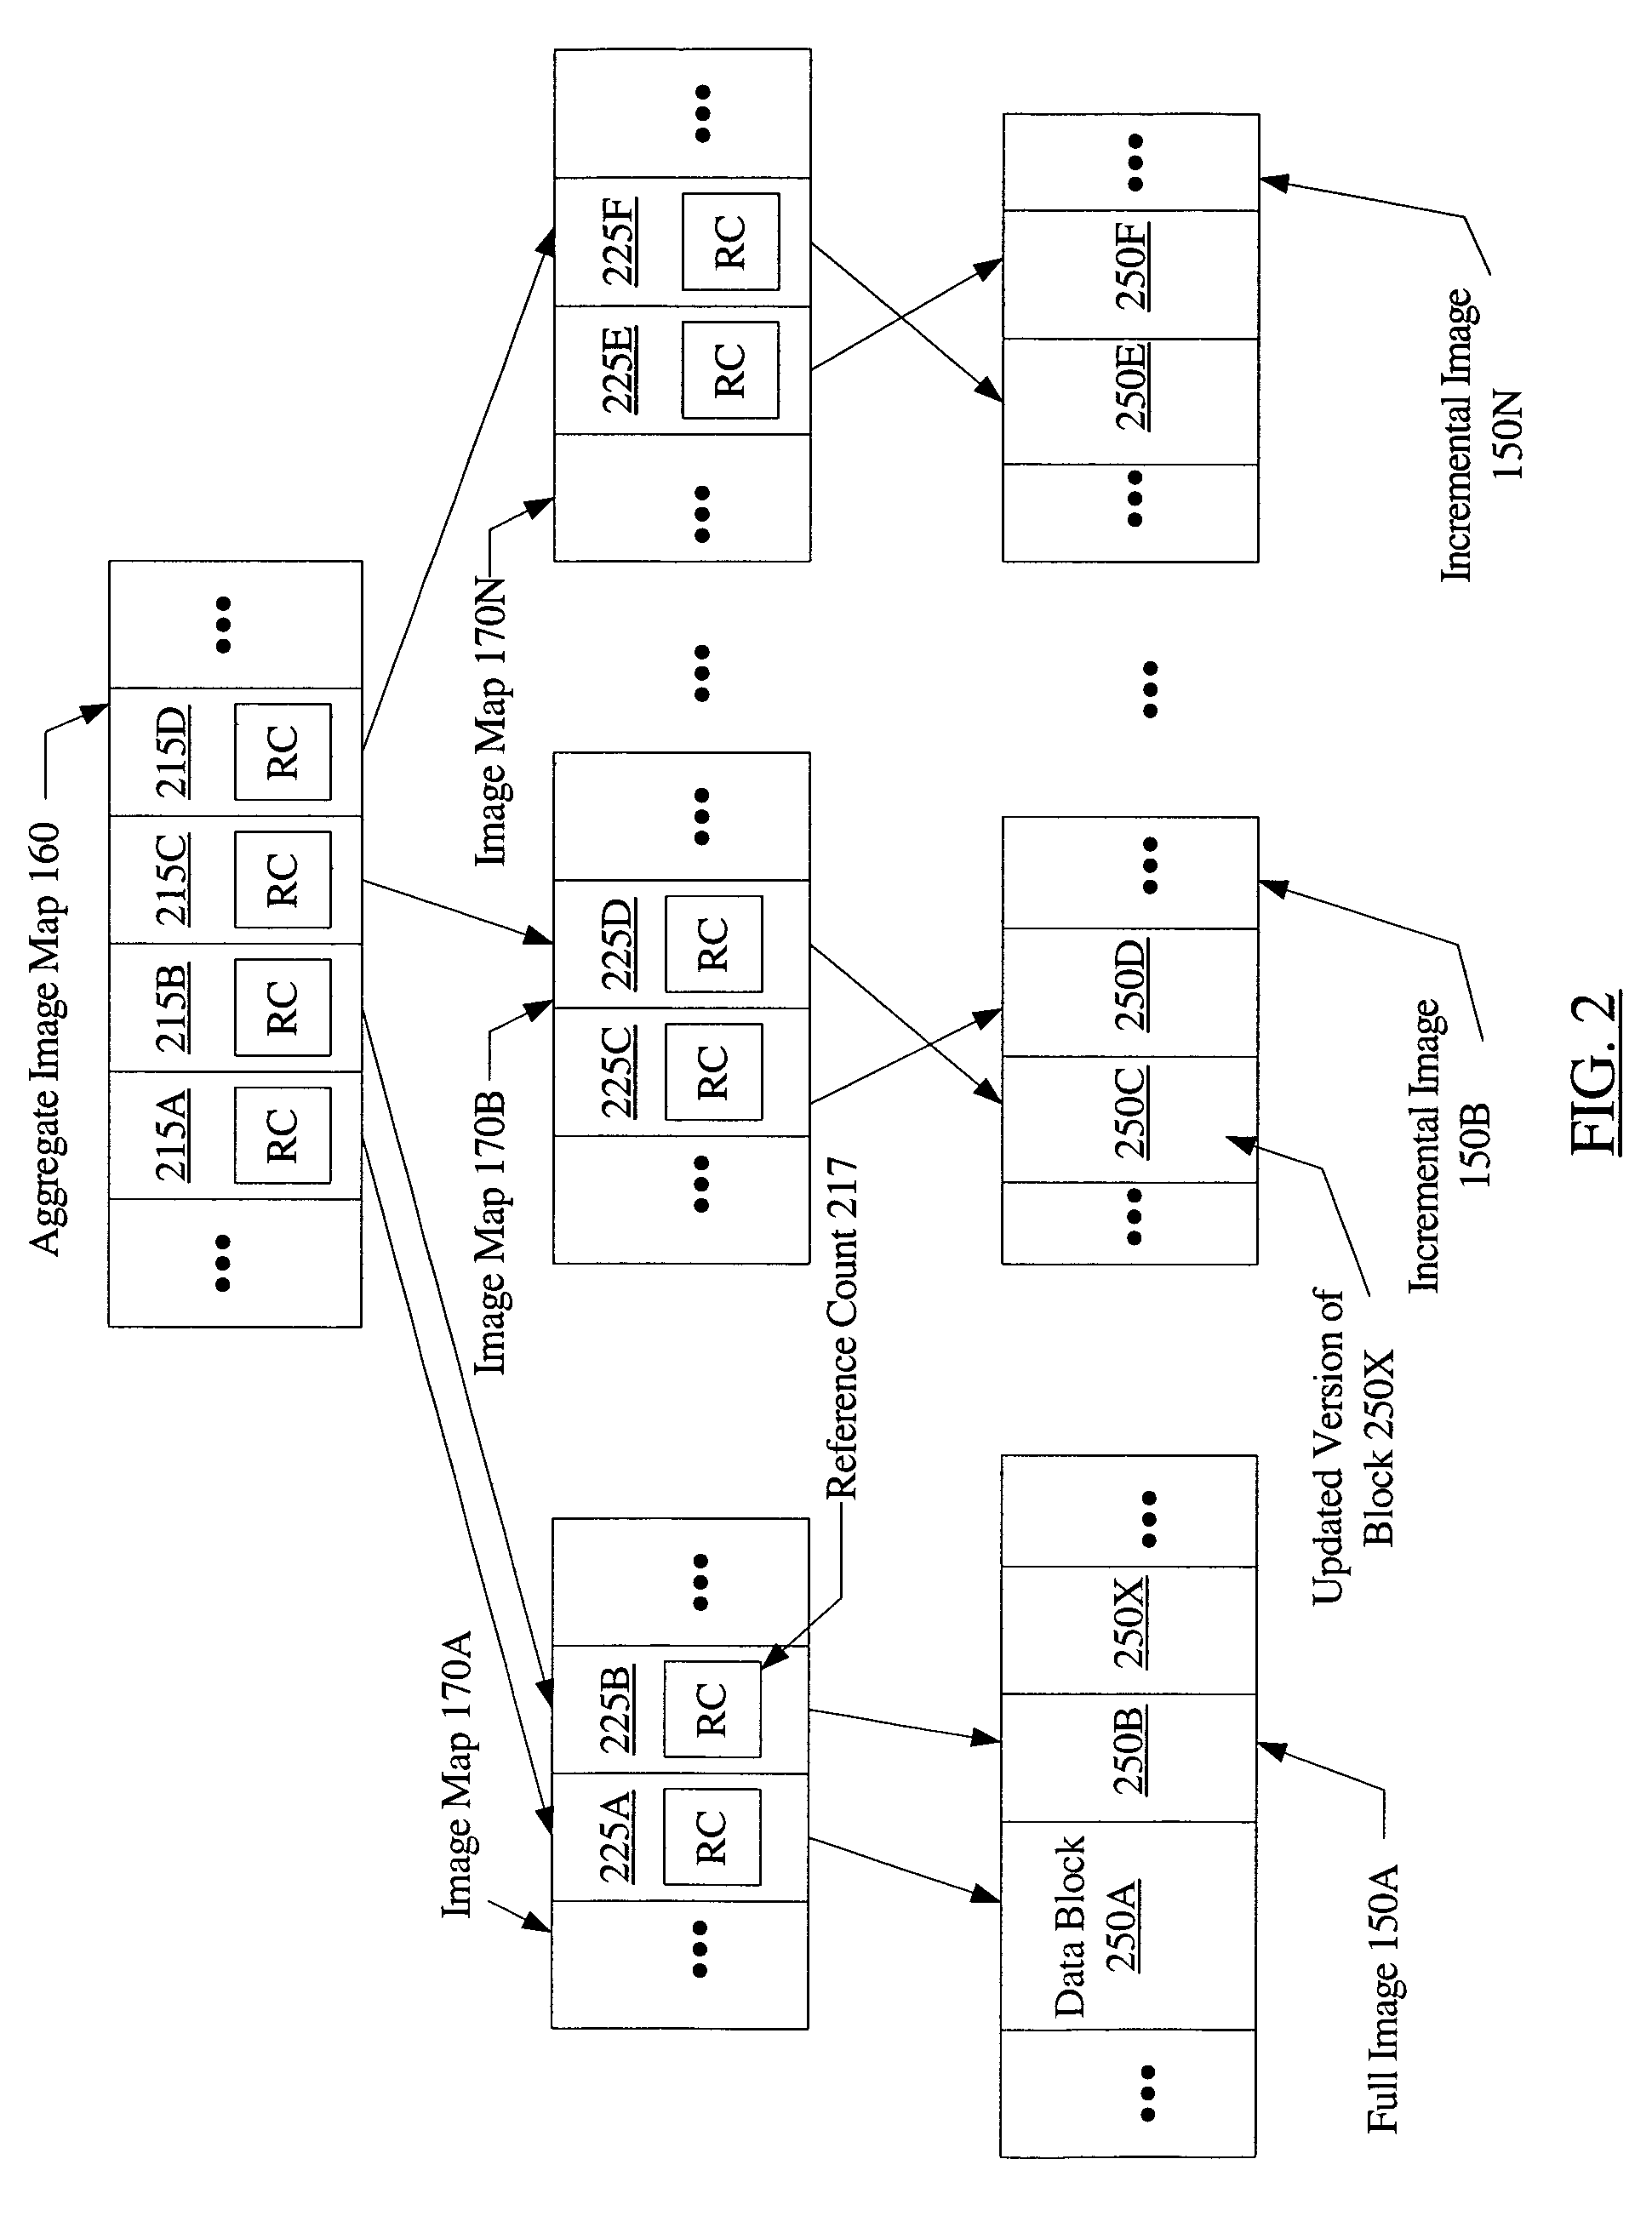 System and method for efficient creation of aggregate backup images